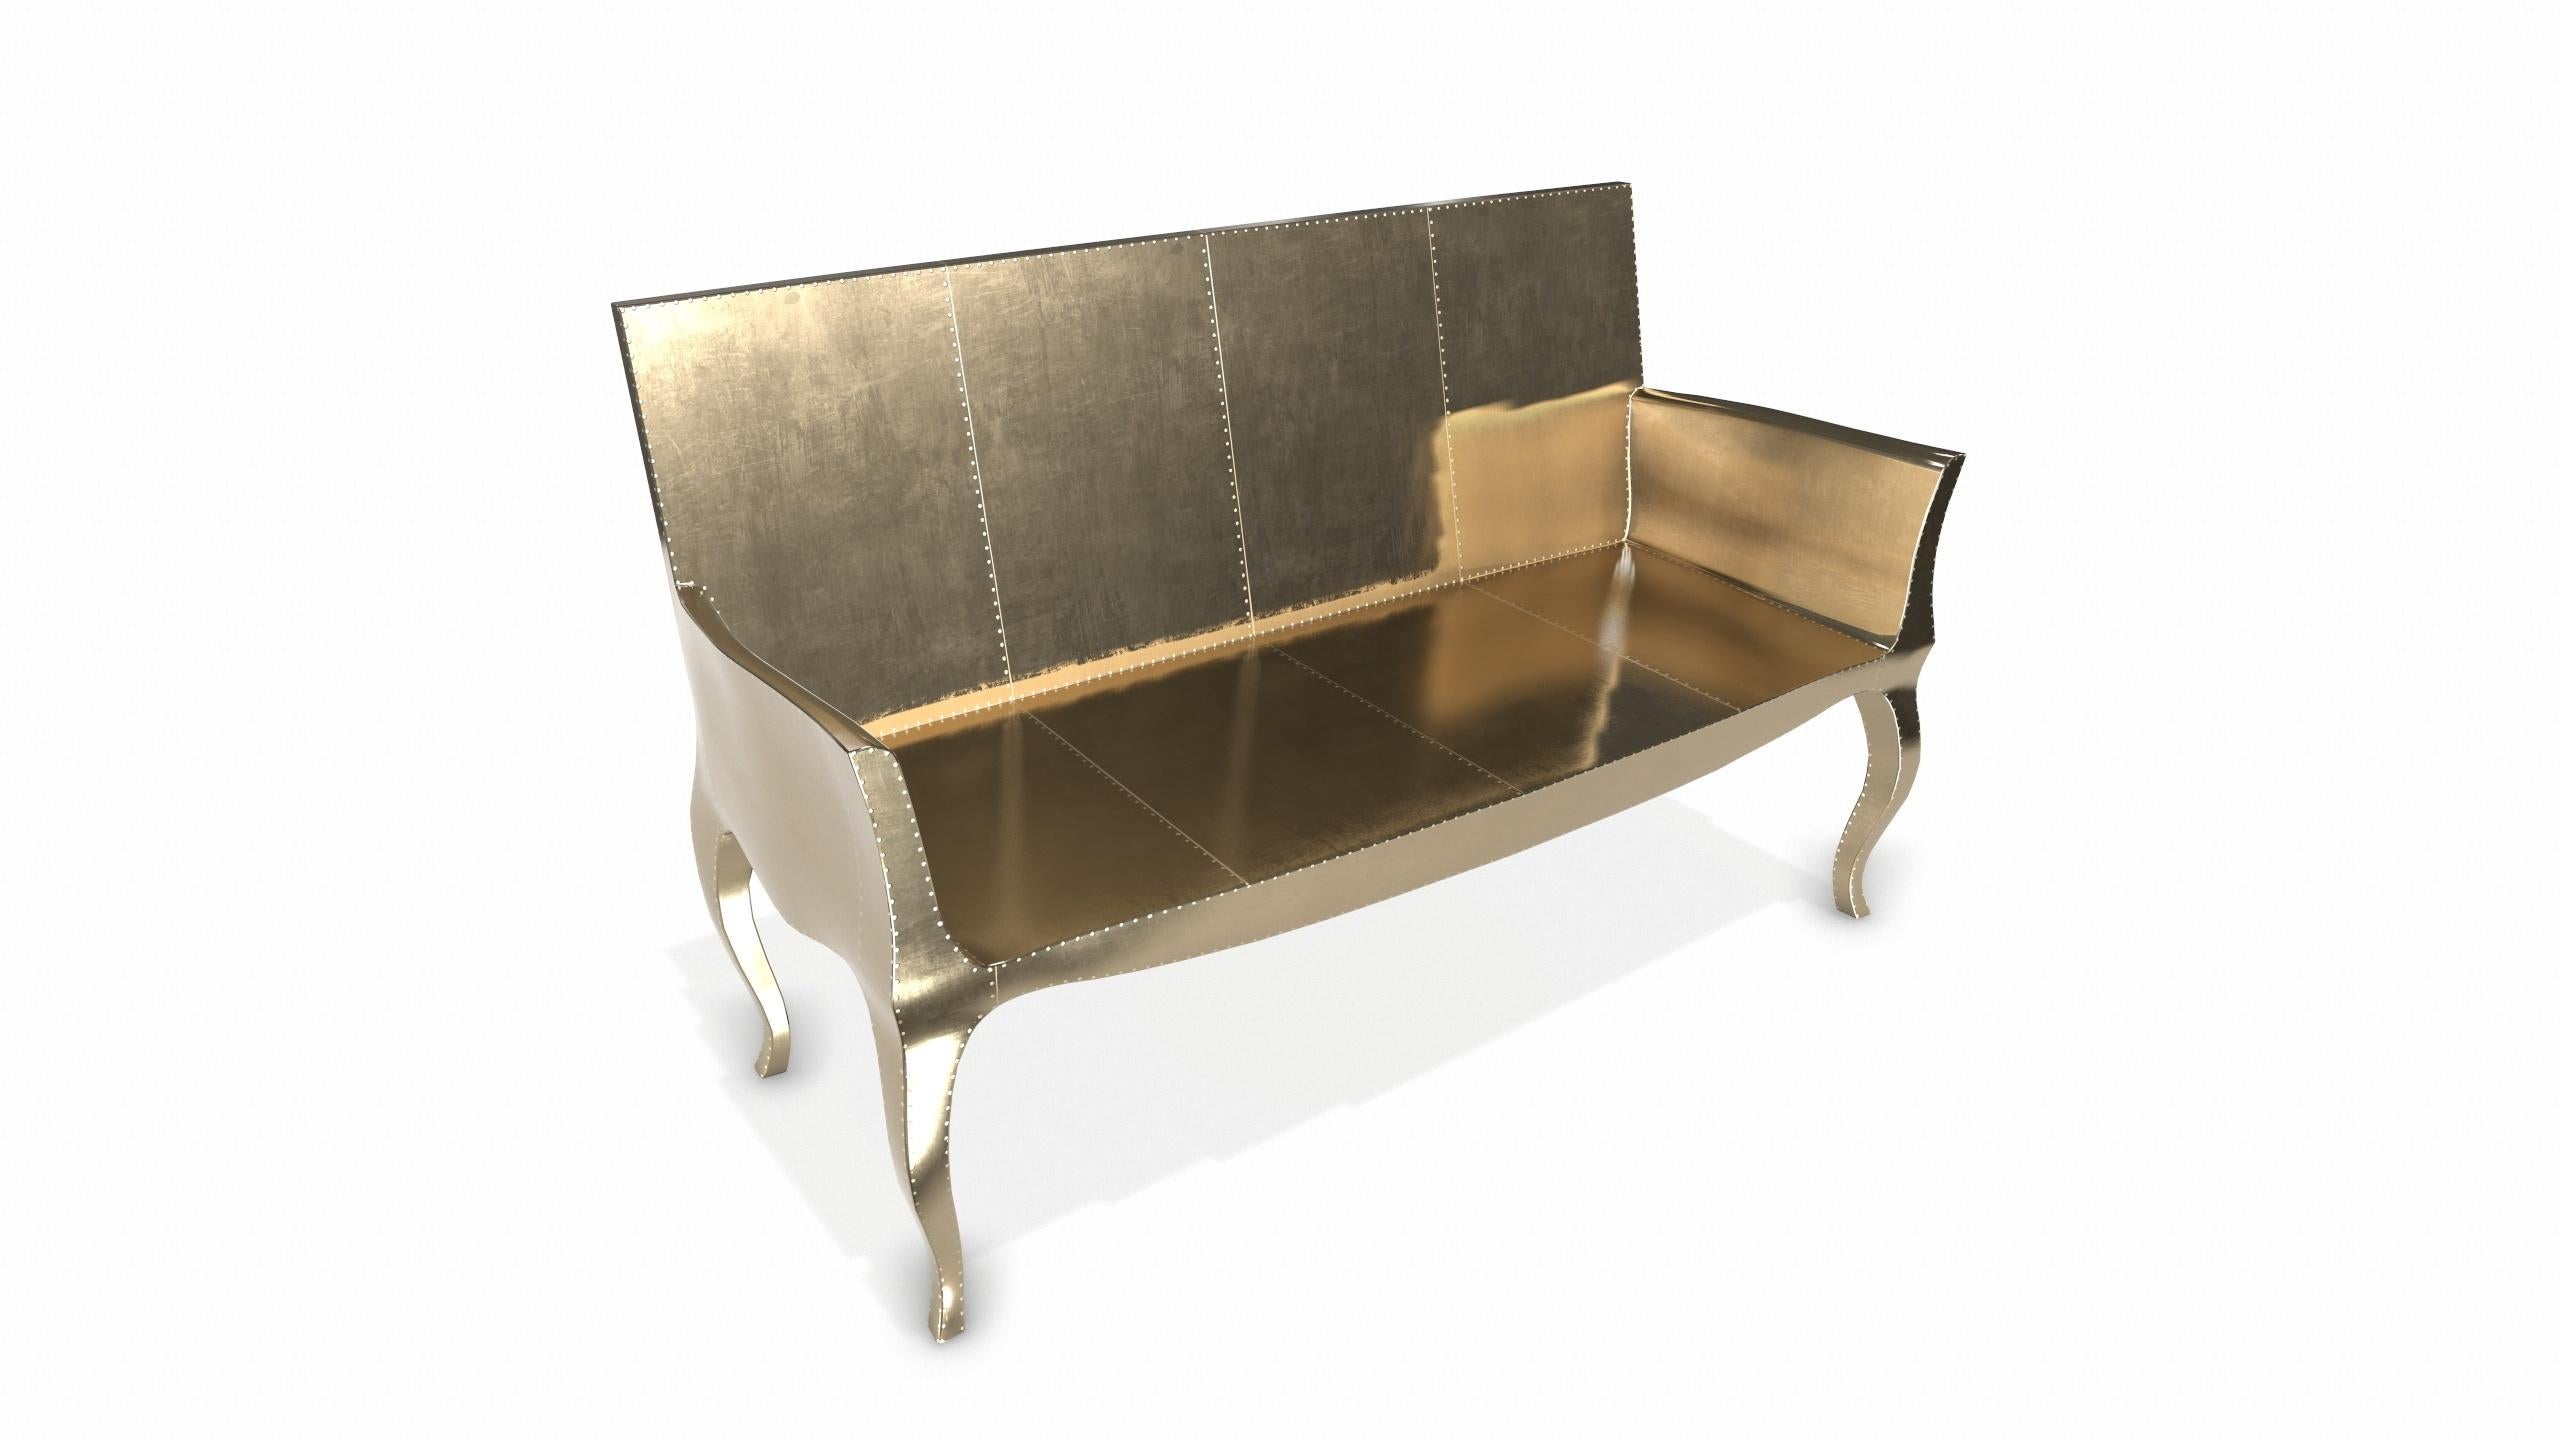 Louise Settee Art Deco Living Room Sets in Smooth Brass by Paul Mathieu For Sale 2